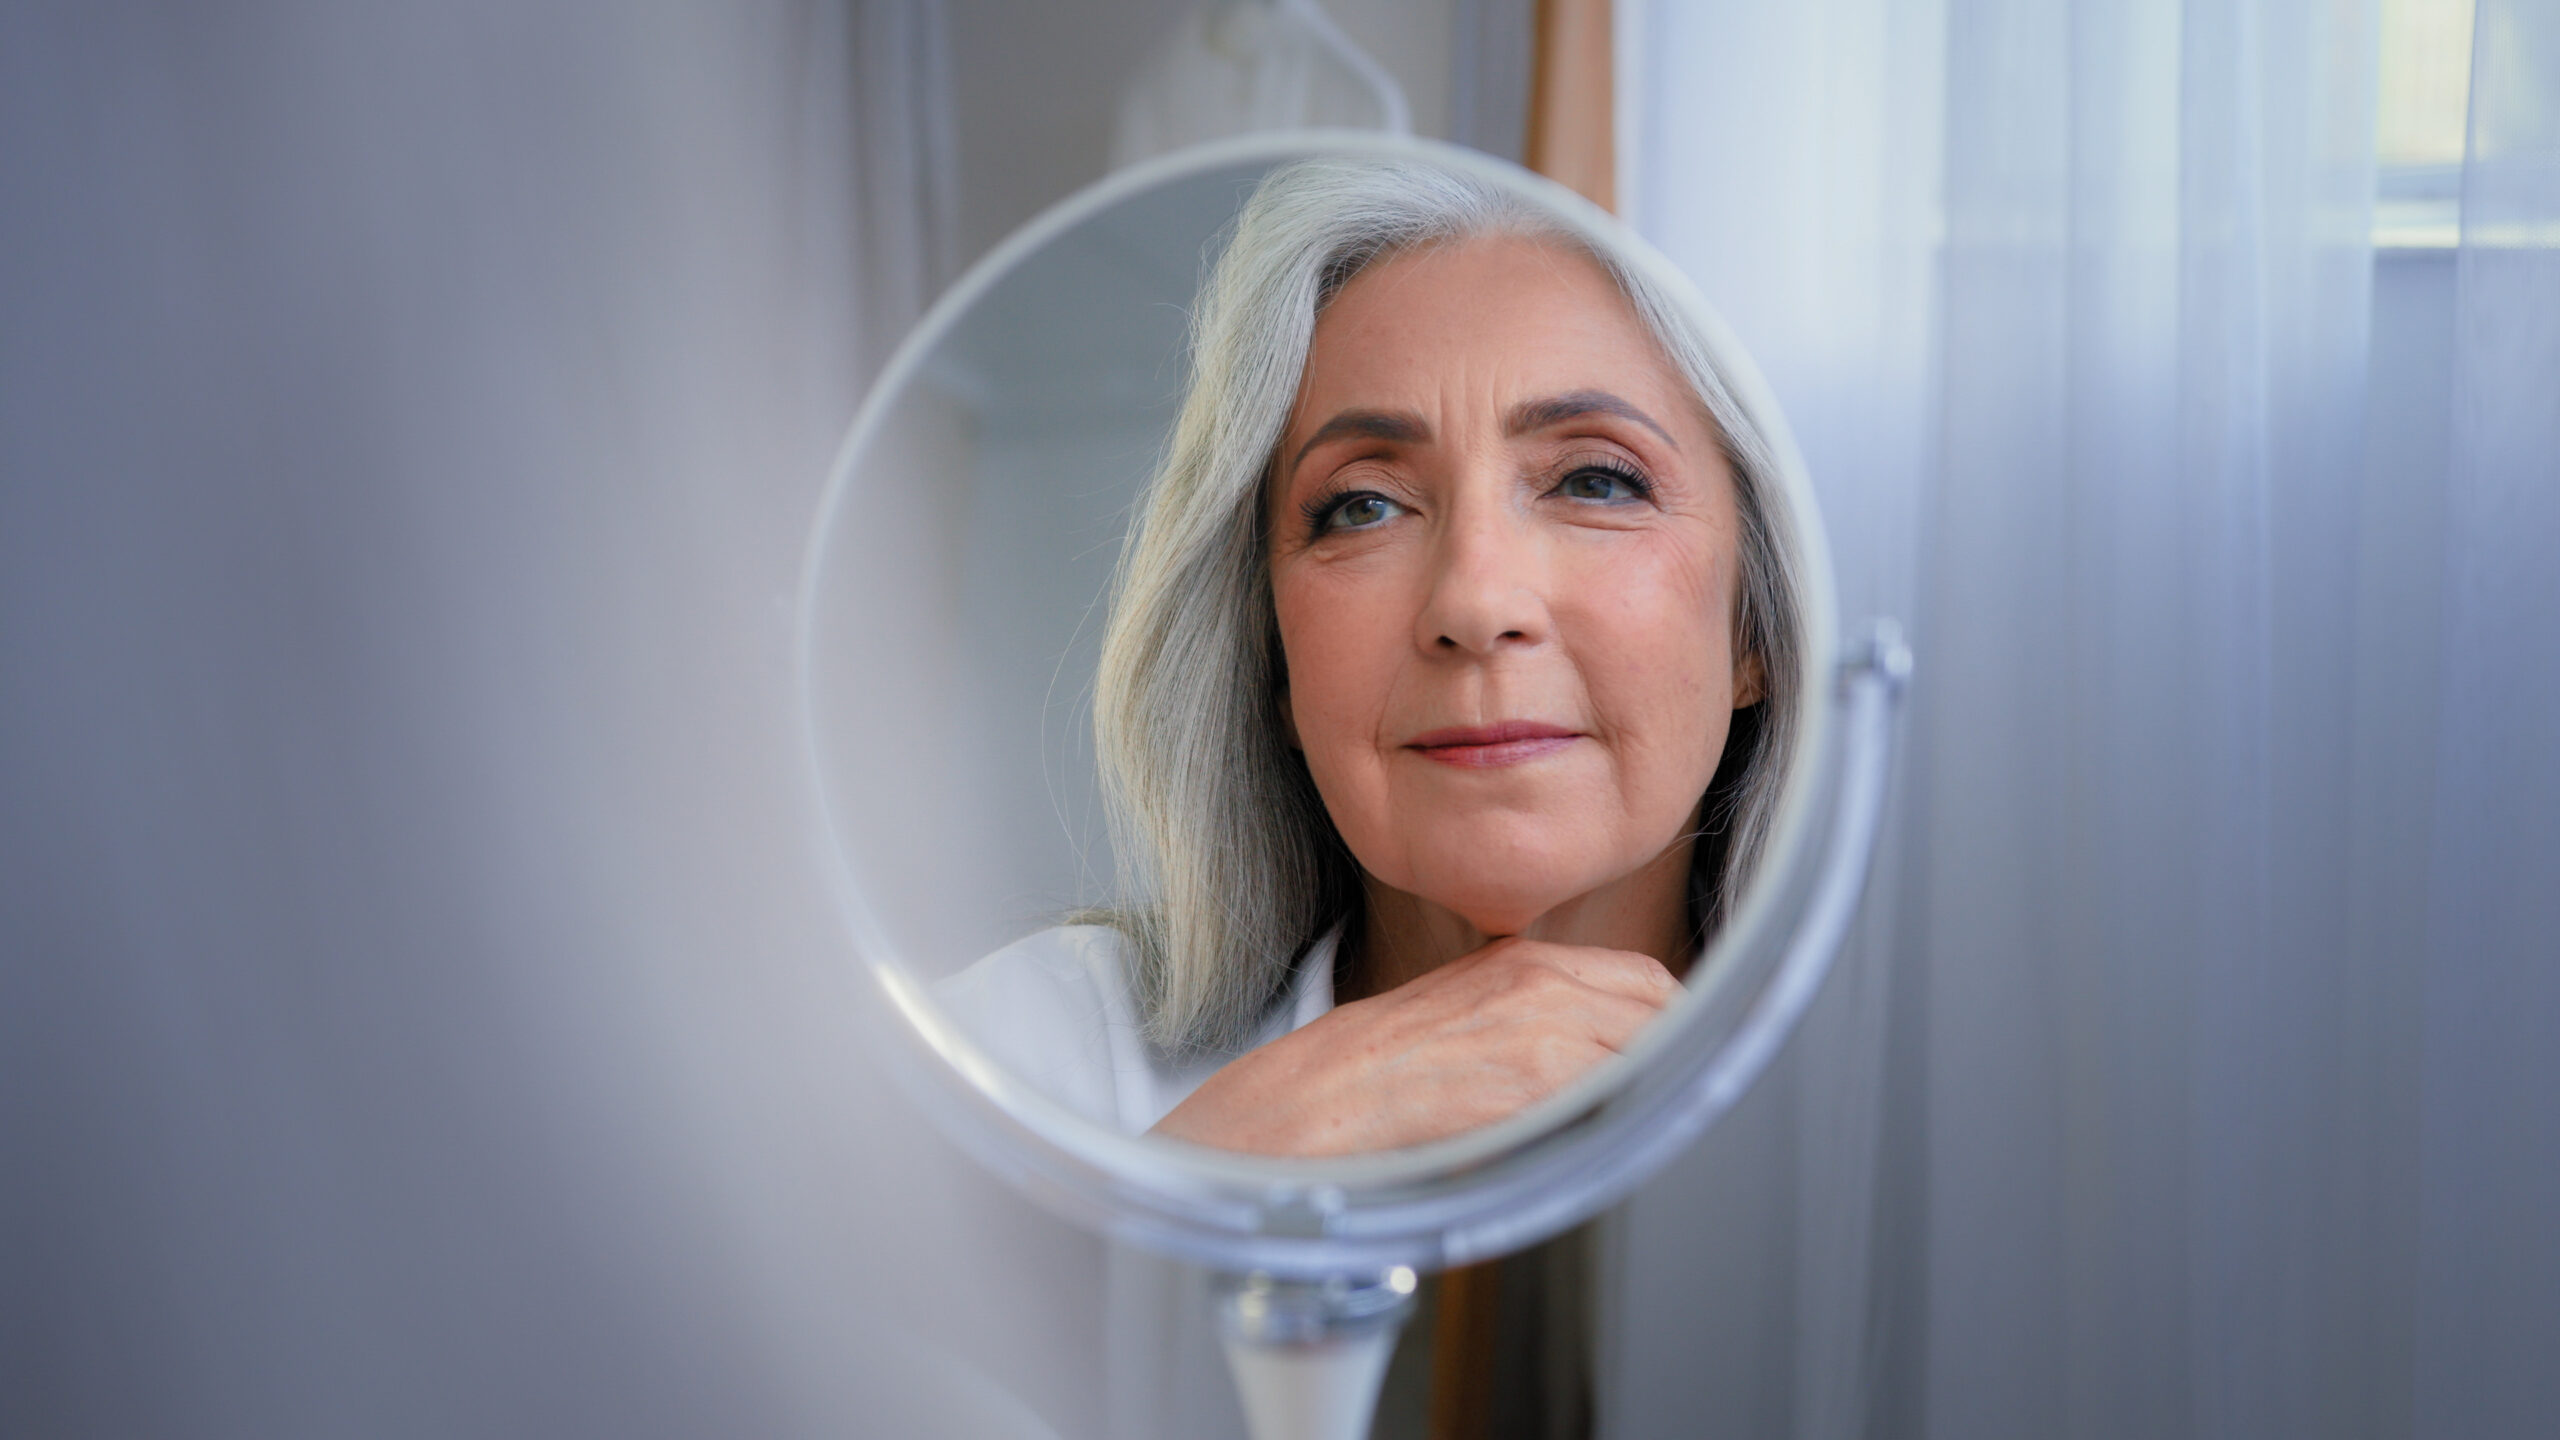 How to Get Rid of Wrinkles: Prevention and Treatment Options